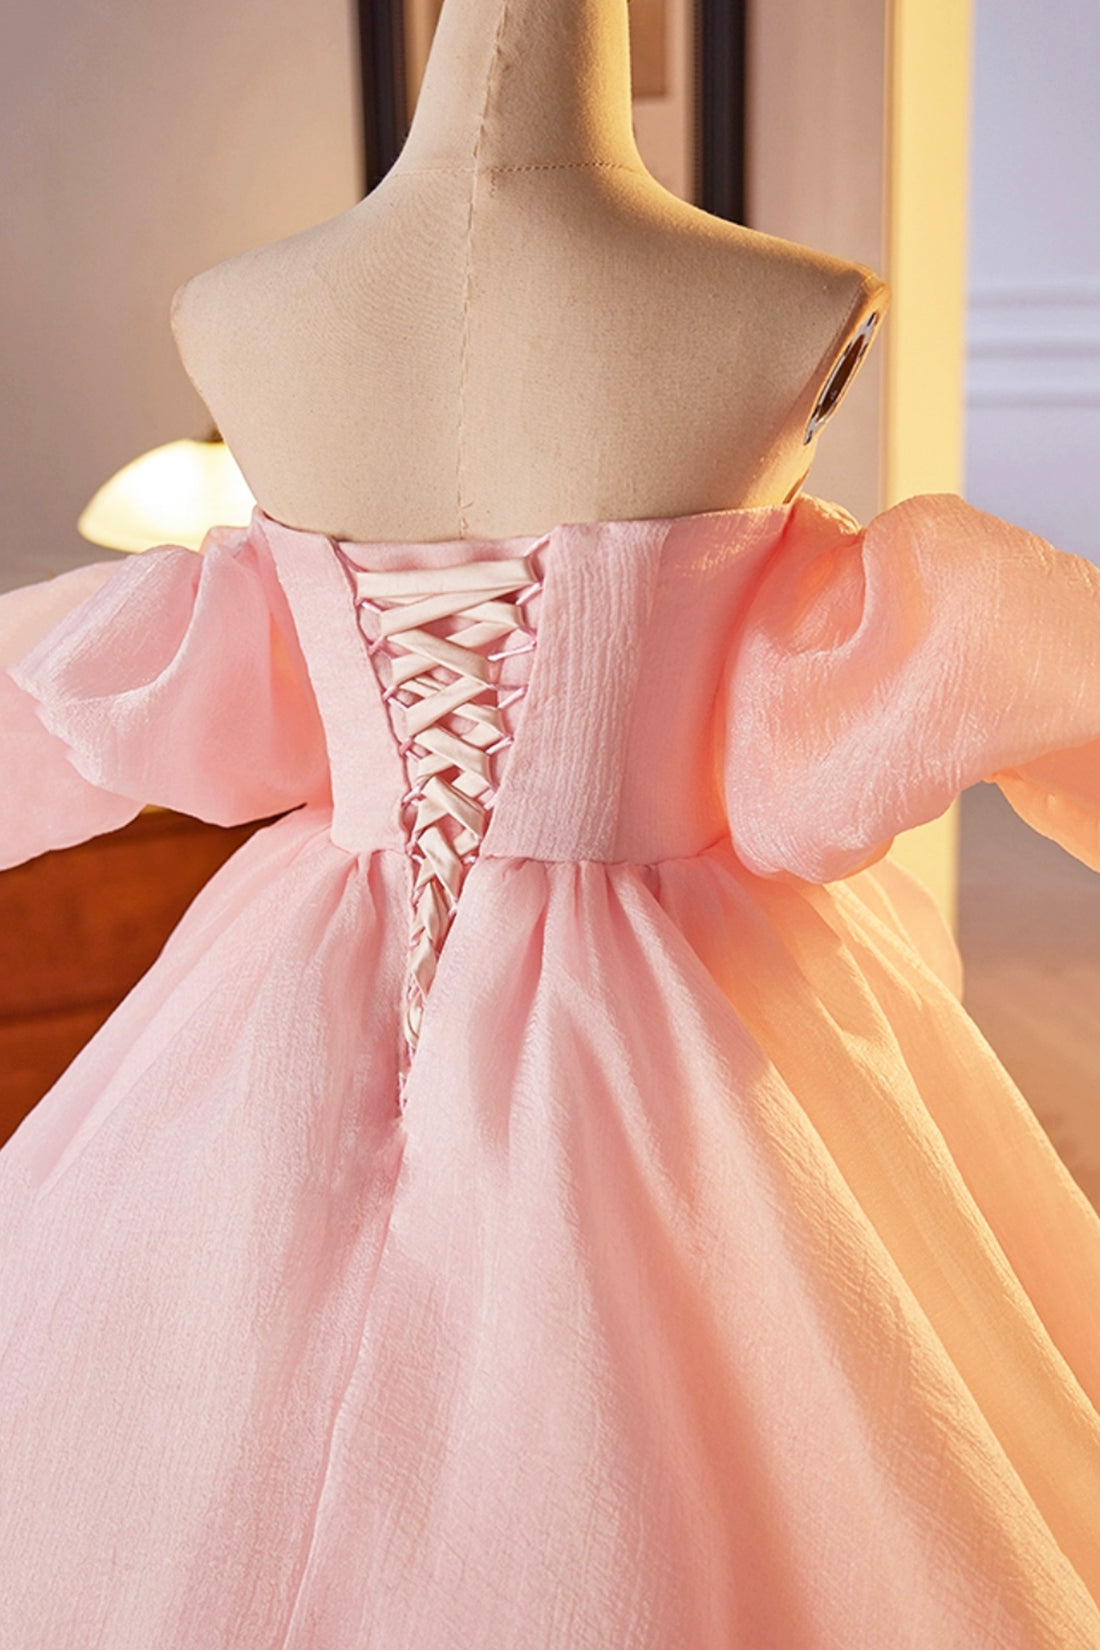 Pink A-Line Sweetheart Ball Gown Formal Dress with Flowers, Off the Shoulder Evening Party Dress